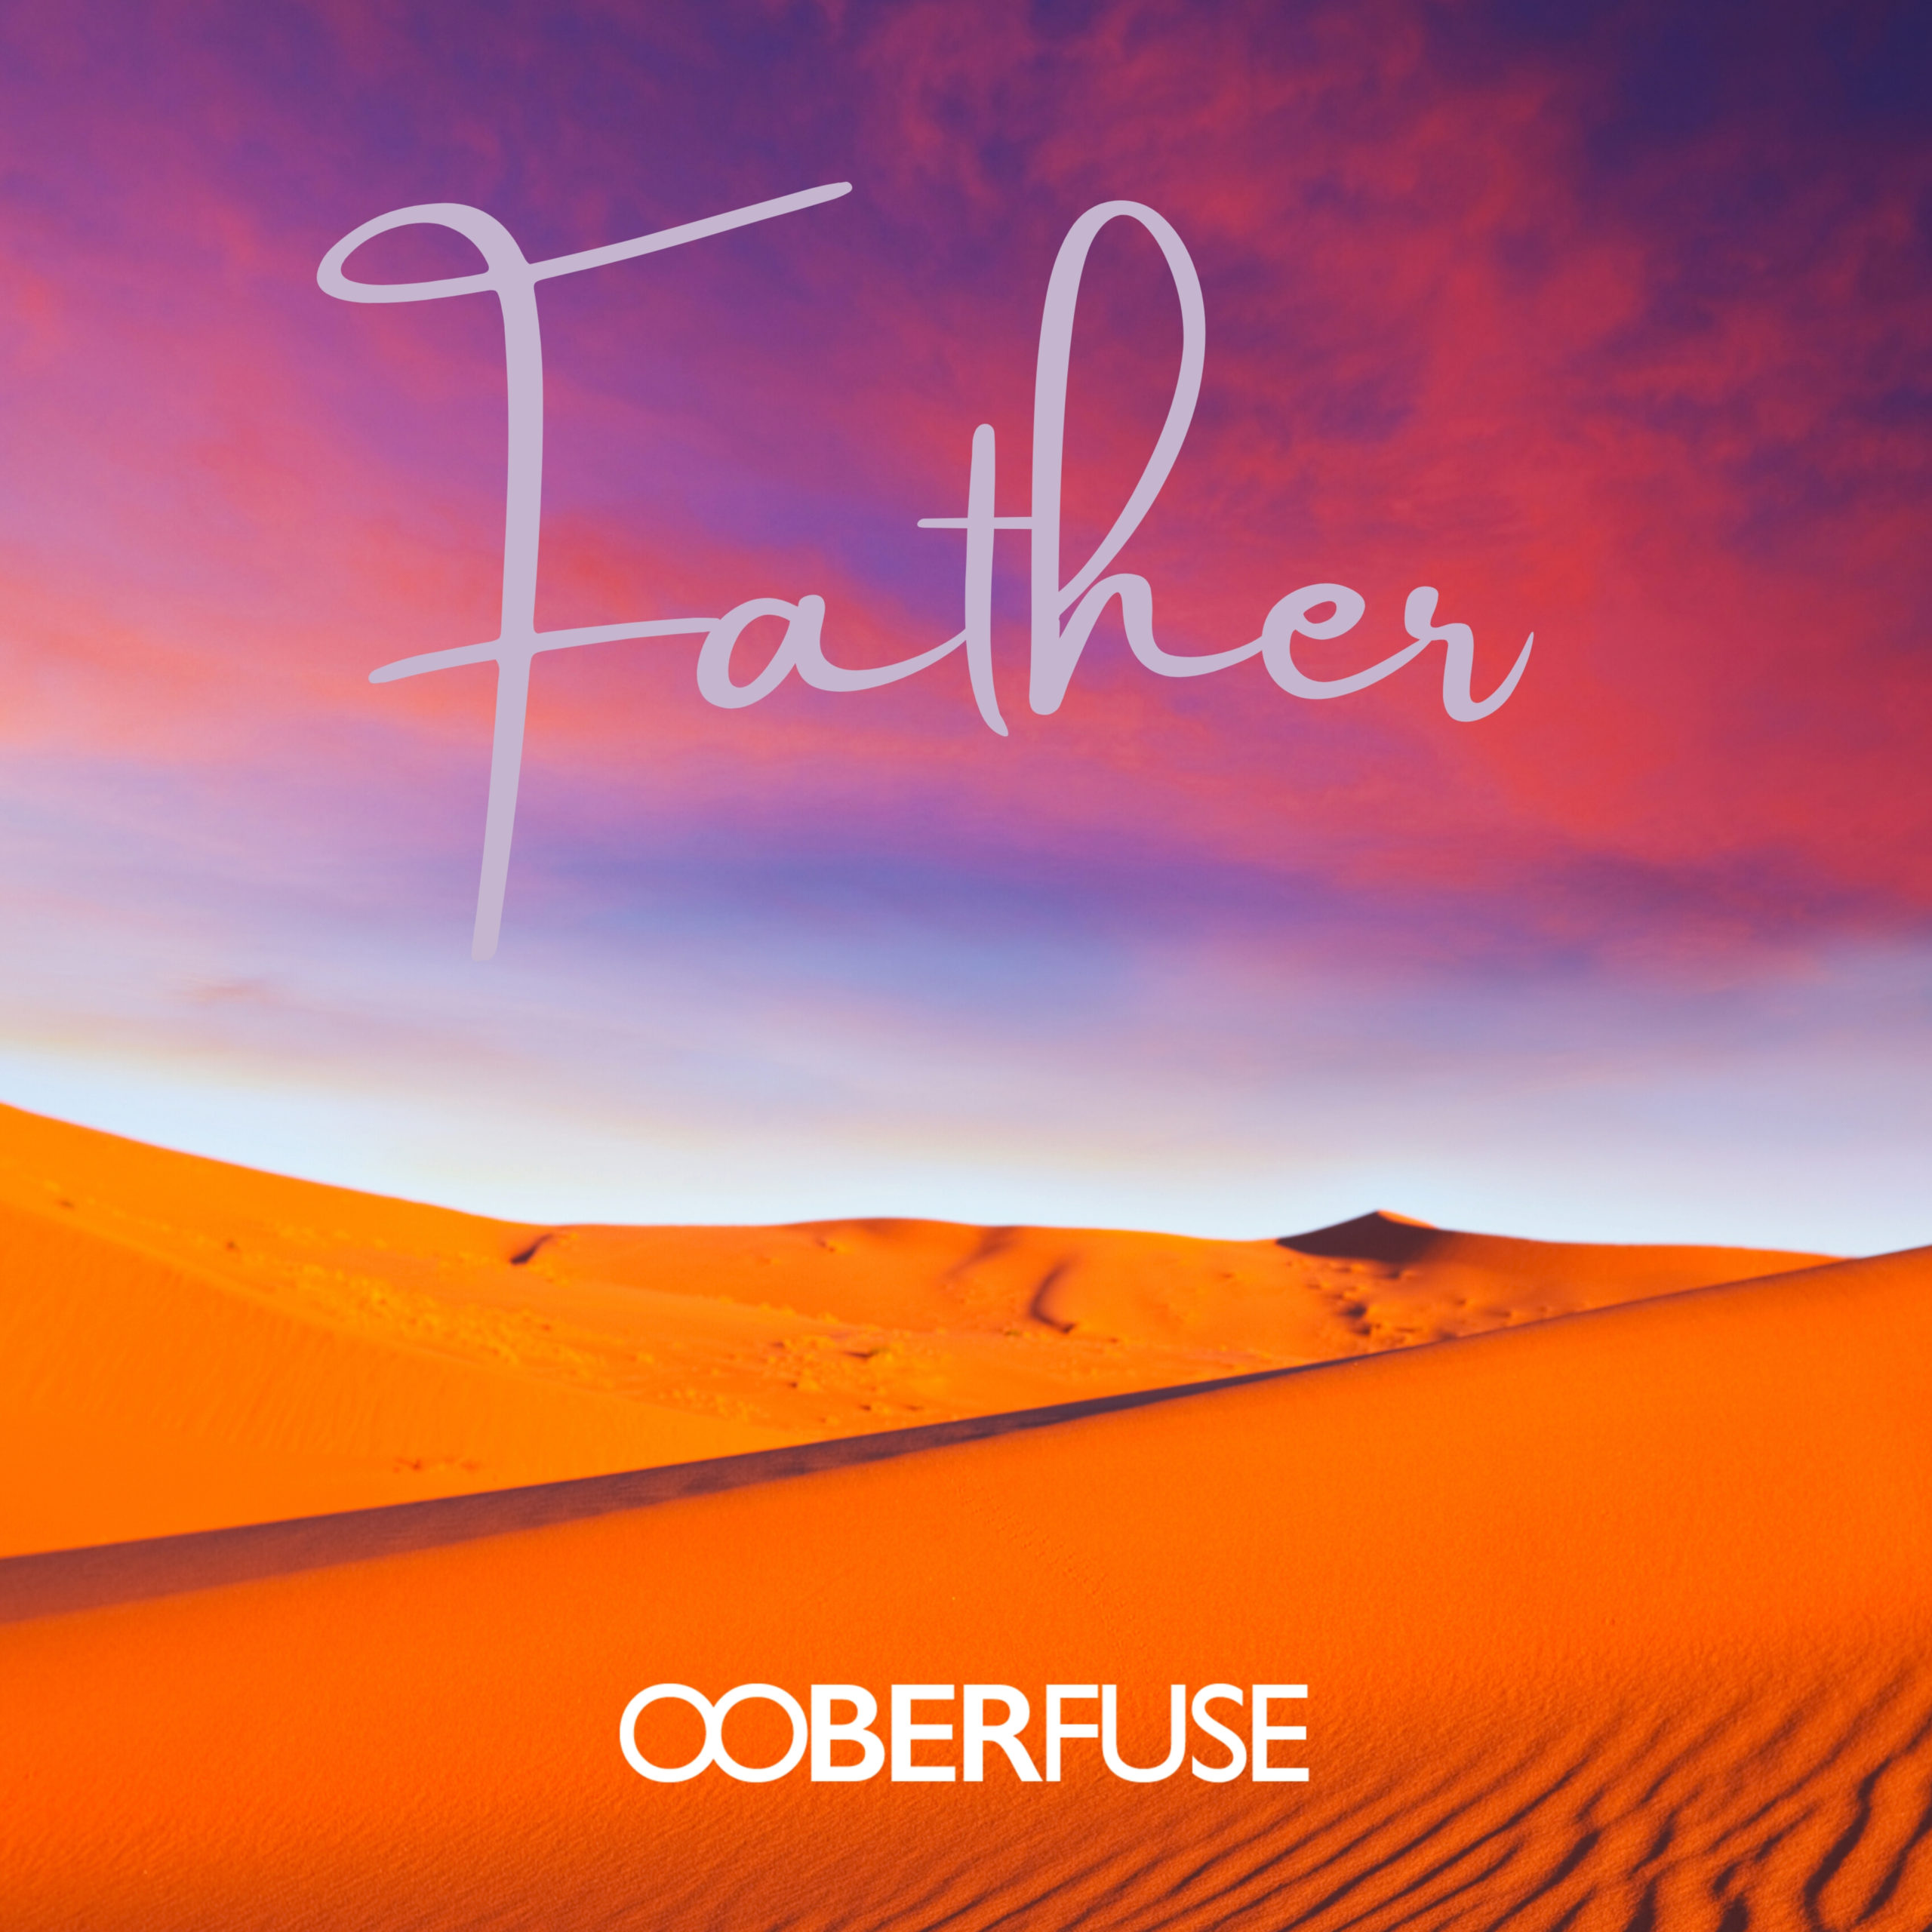 Ooberfuse release stunning new single Father